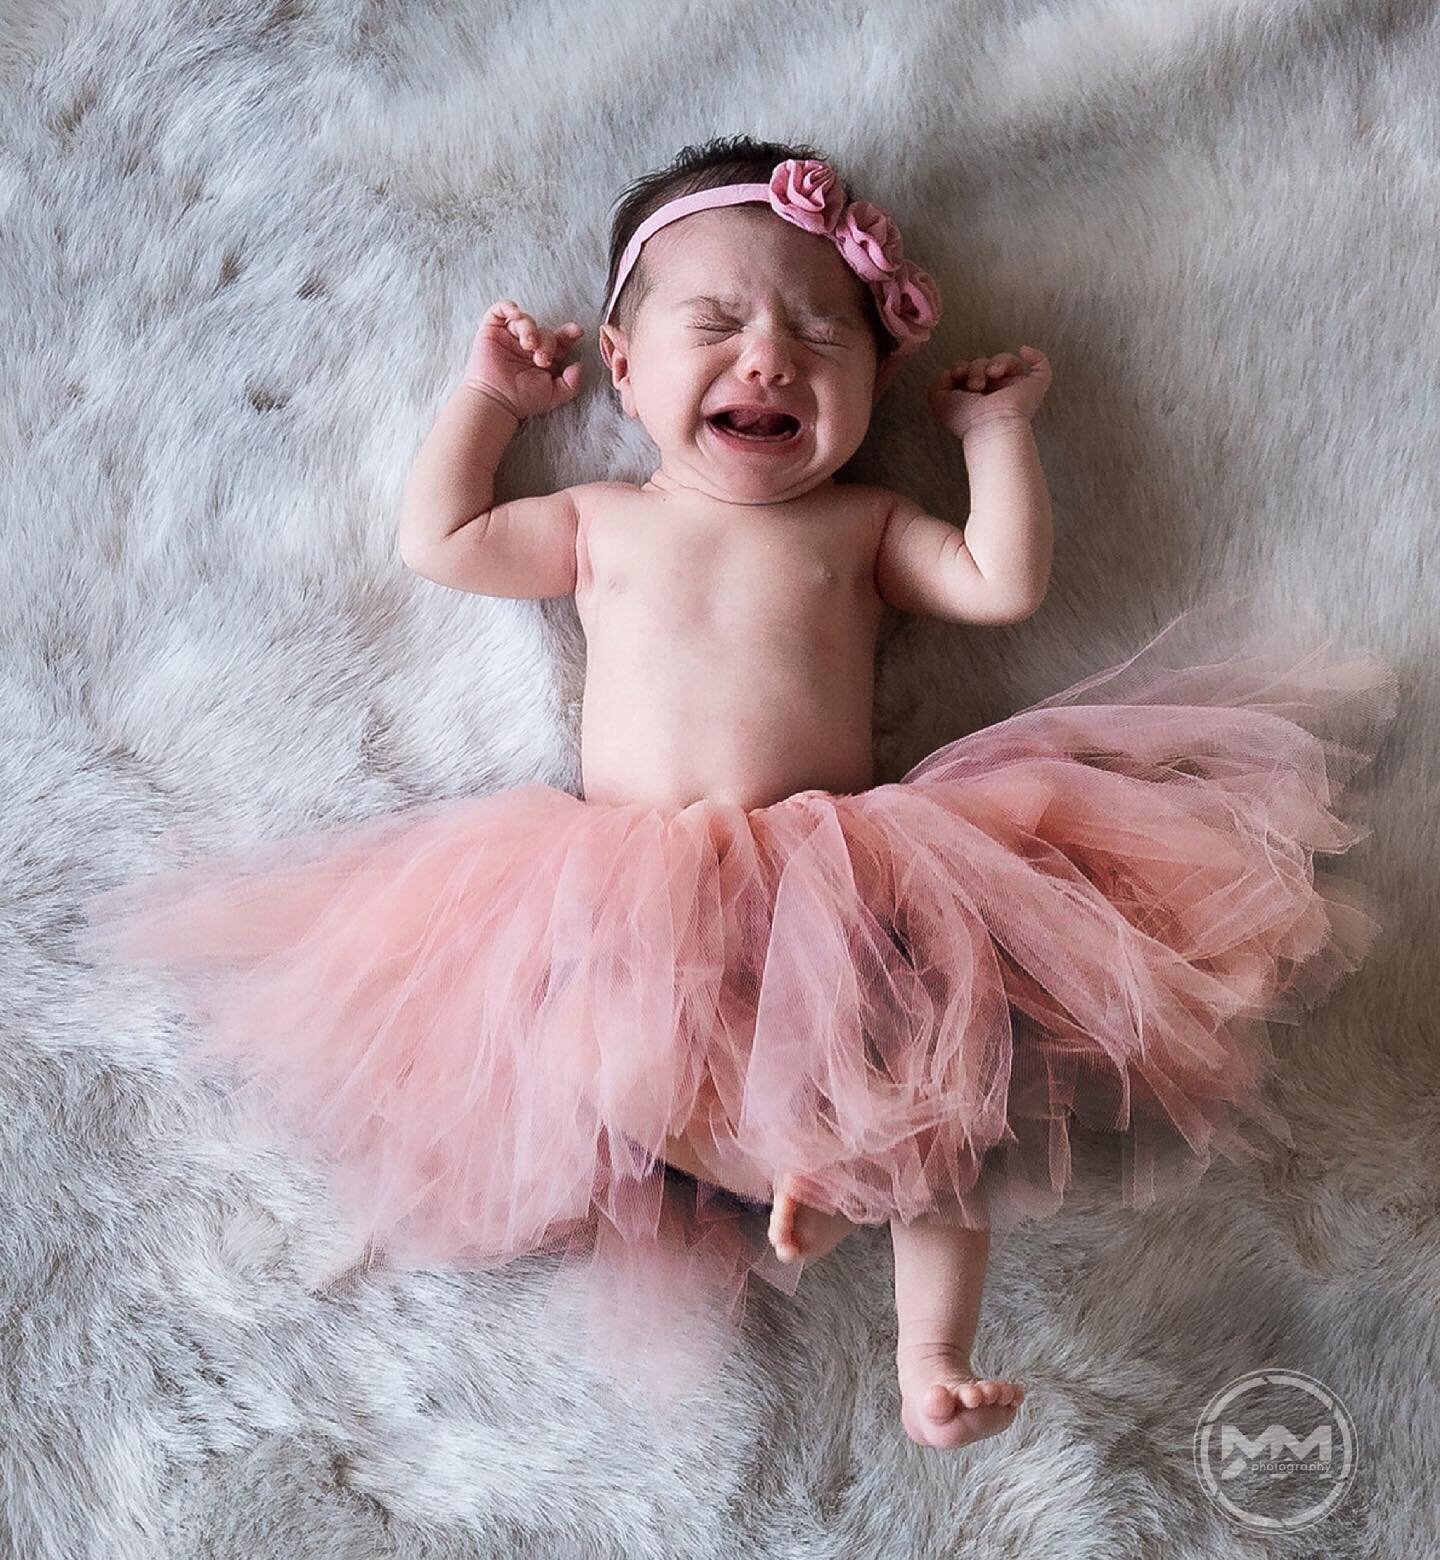 The tutu is rarely their favorite outfit. Newborn babies always have the last word in regards to outfits and styles.  So I only got this shot with the tutu, because Amara definetely said &quot;no tutu!&quot;